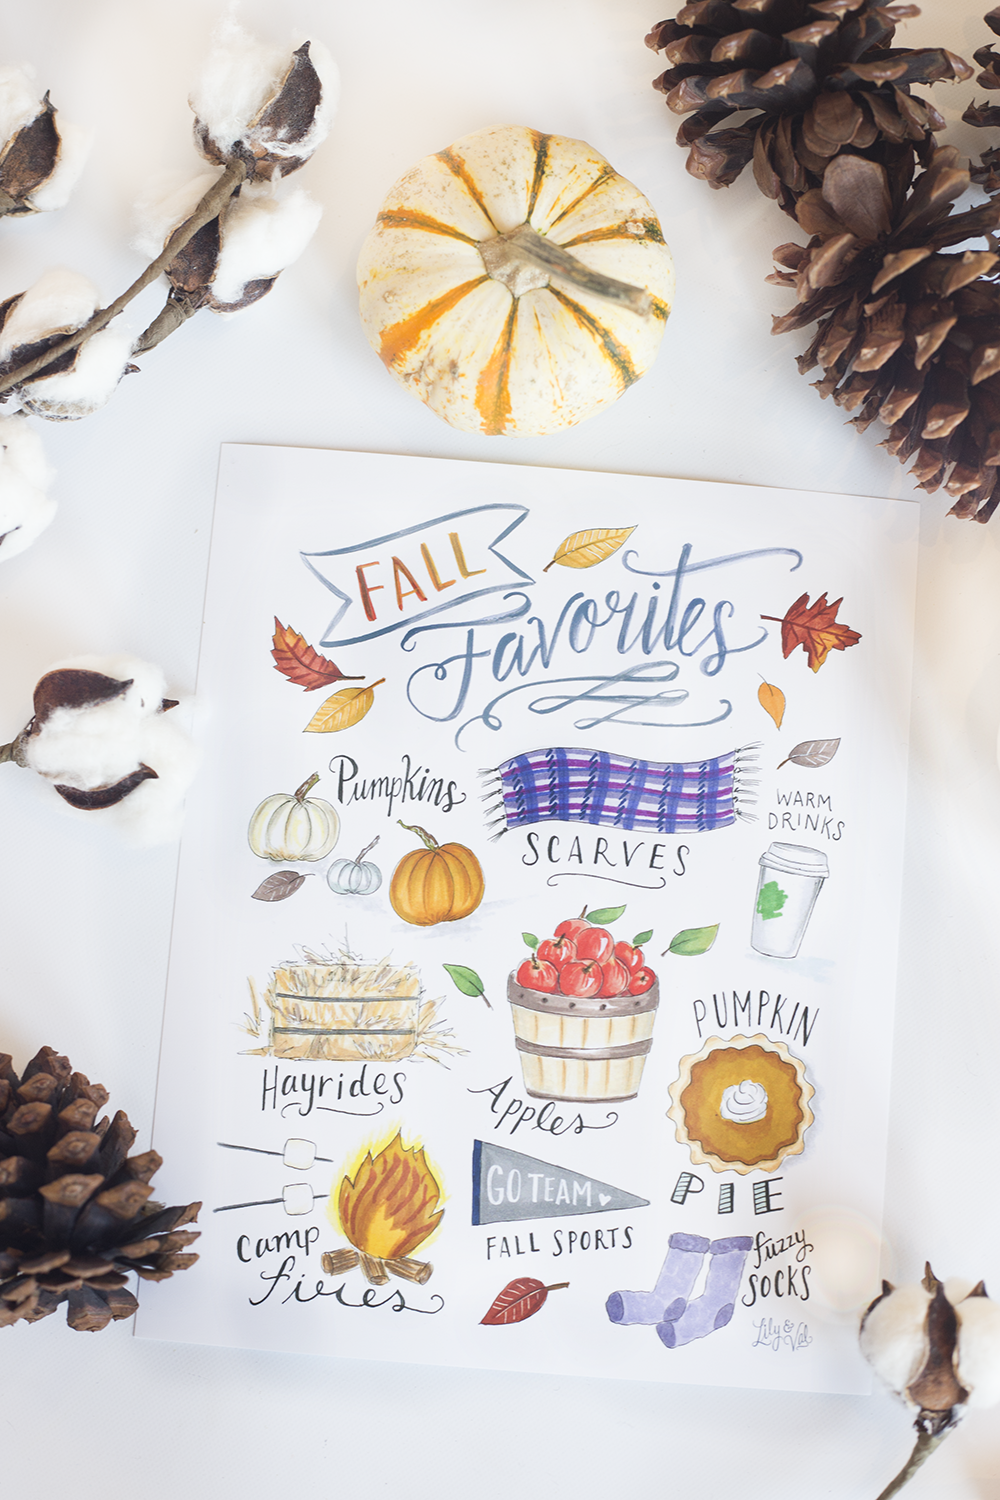 Need inspiration for your Friendsgiving this year? Click through to read our top five ideas to cozy up your celebration!